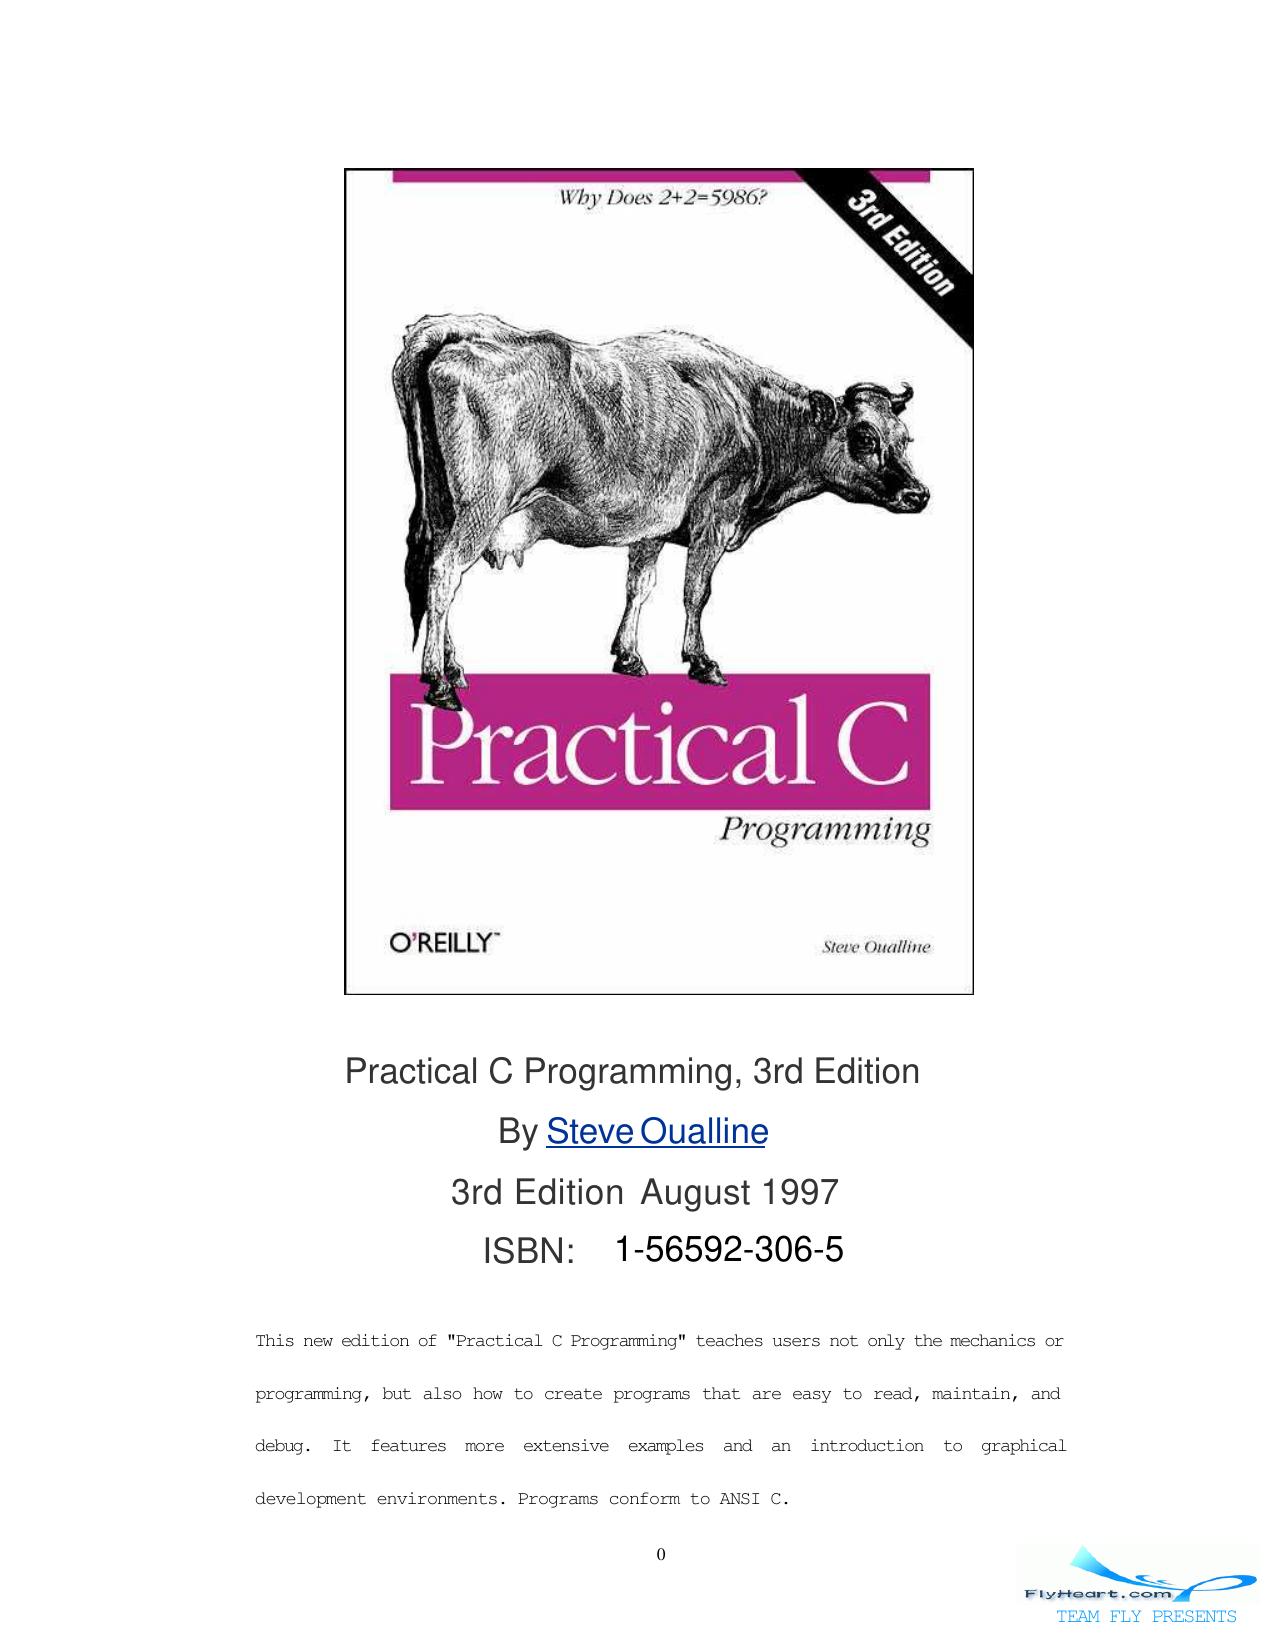 O_Reilly_-_Practical_C_Programming_3rd_Edition.pdf